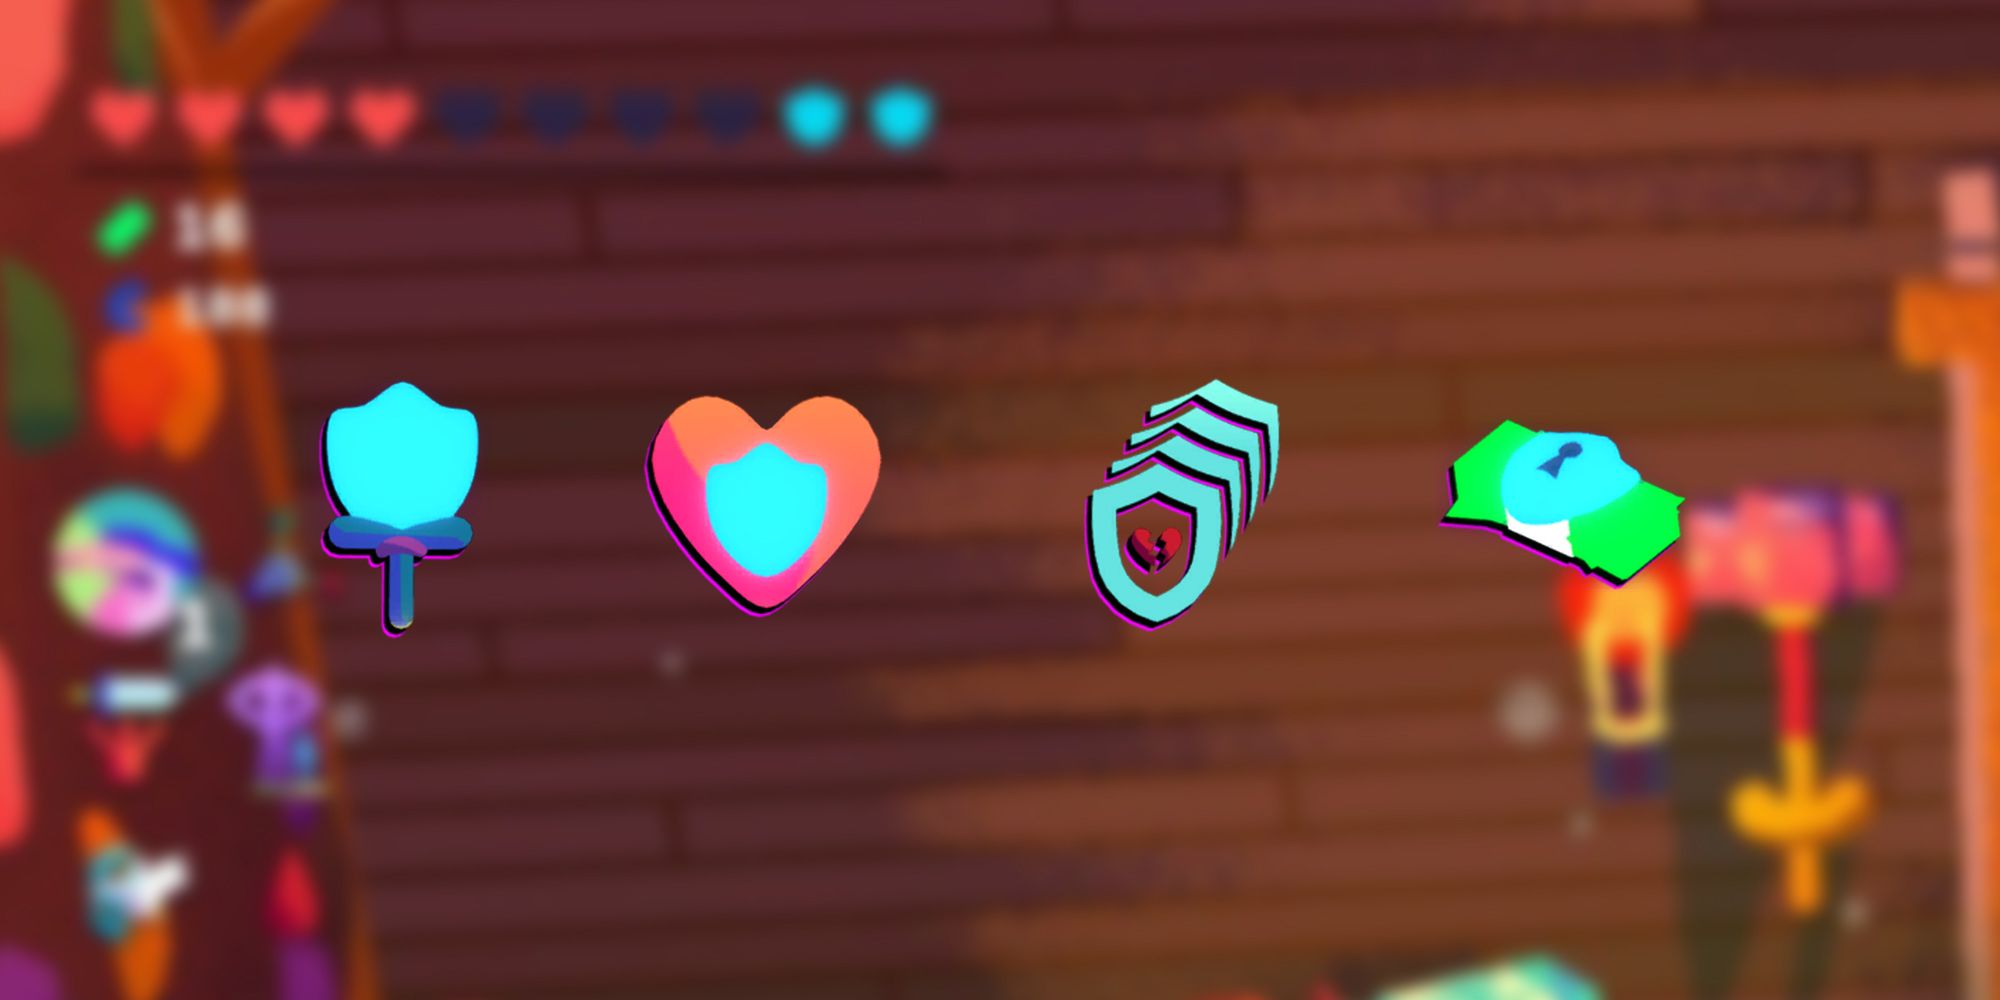 Going Under - Icons For Any Skill Related To Gaining Armor Overlaid On Close-Up Image Showing The Armor Icon In-Game